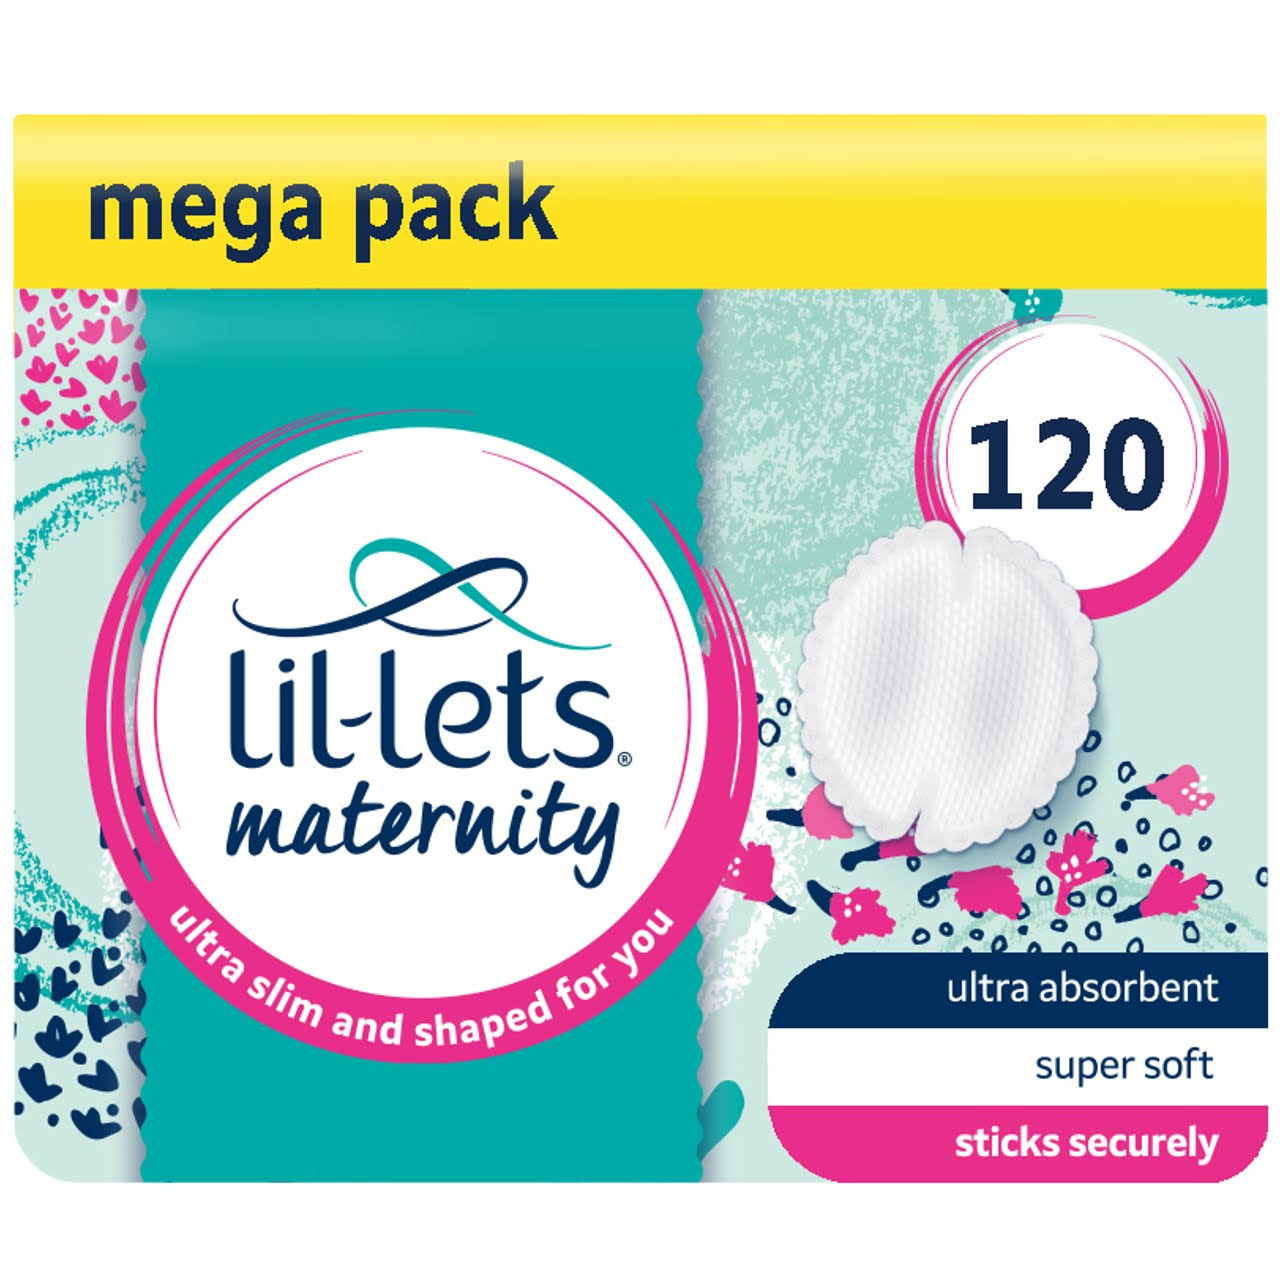 Lil-Lets Maternity Breast Pads Ultra Slim, Fragrance Free, 30 Pads, 4 Packs (120 Count)